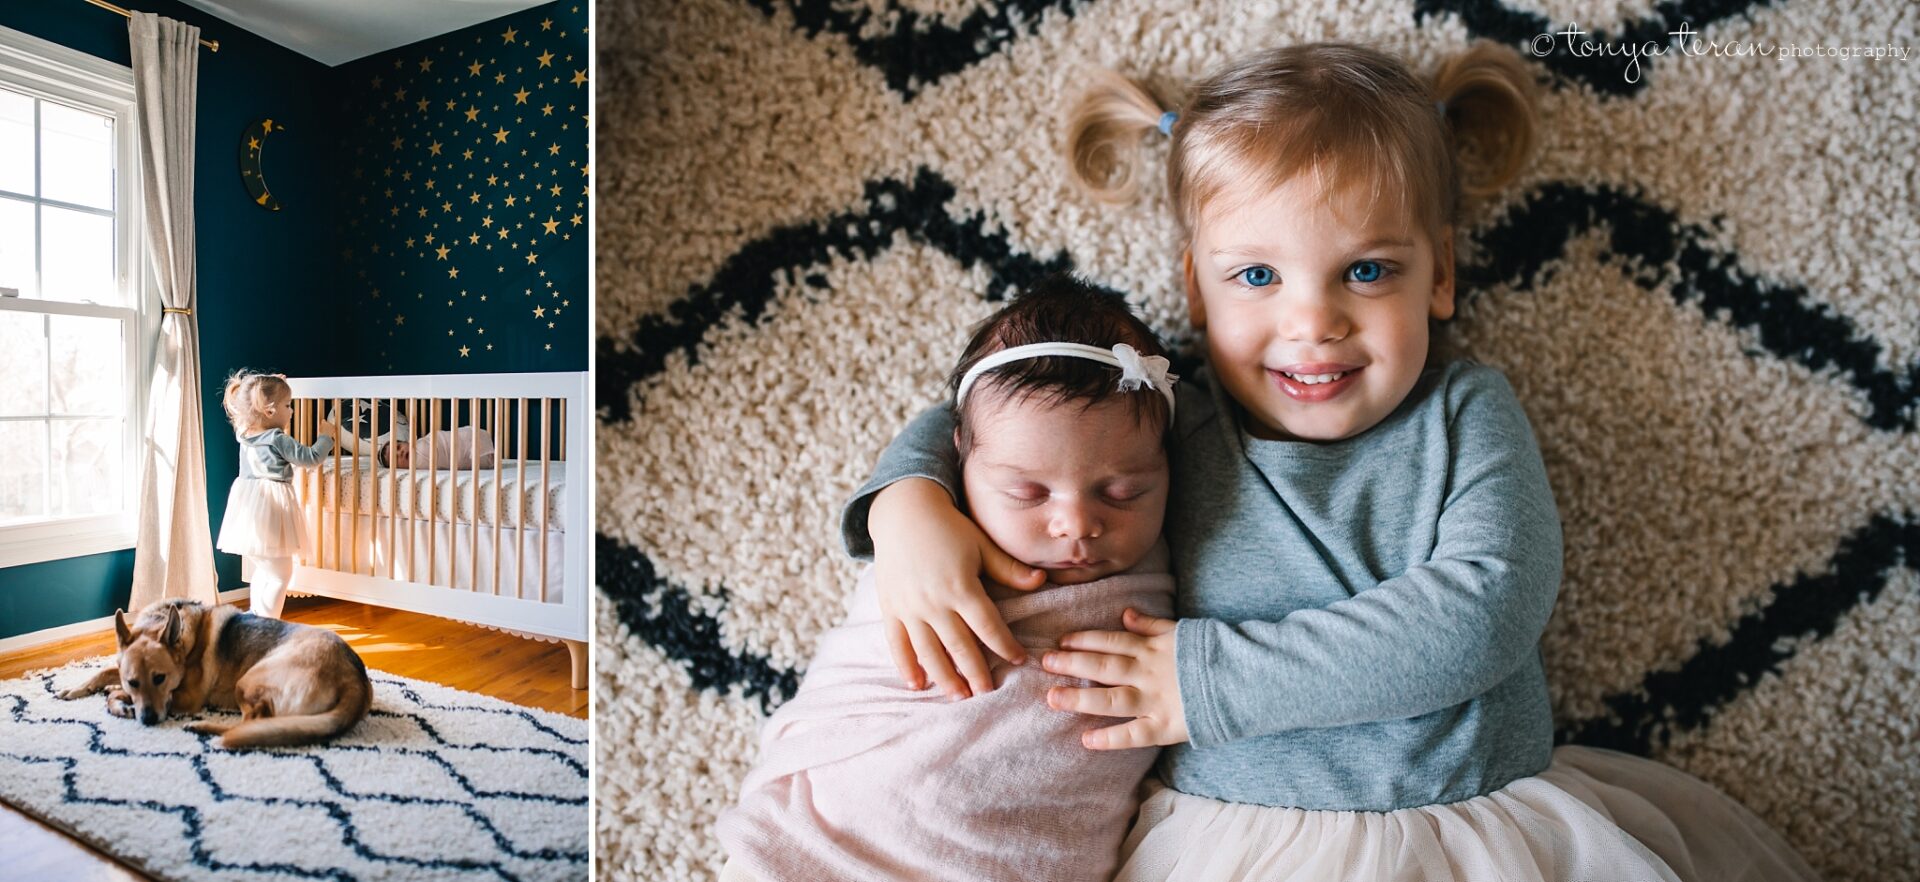 in-home lifestyle sibling photo dc newborn photographer